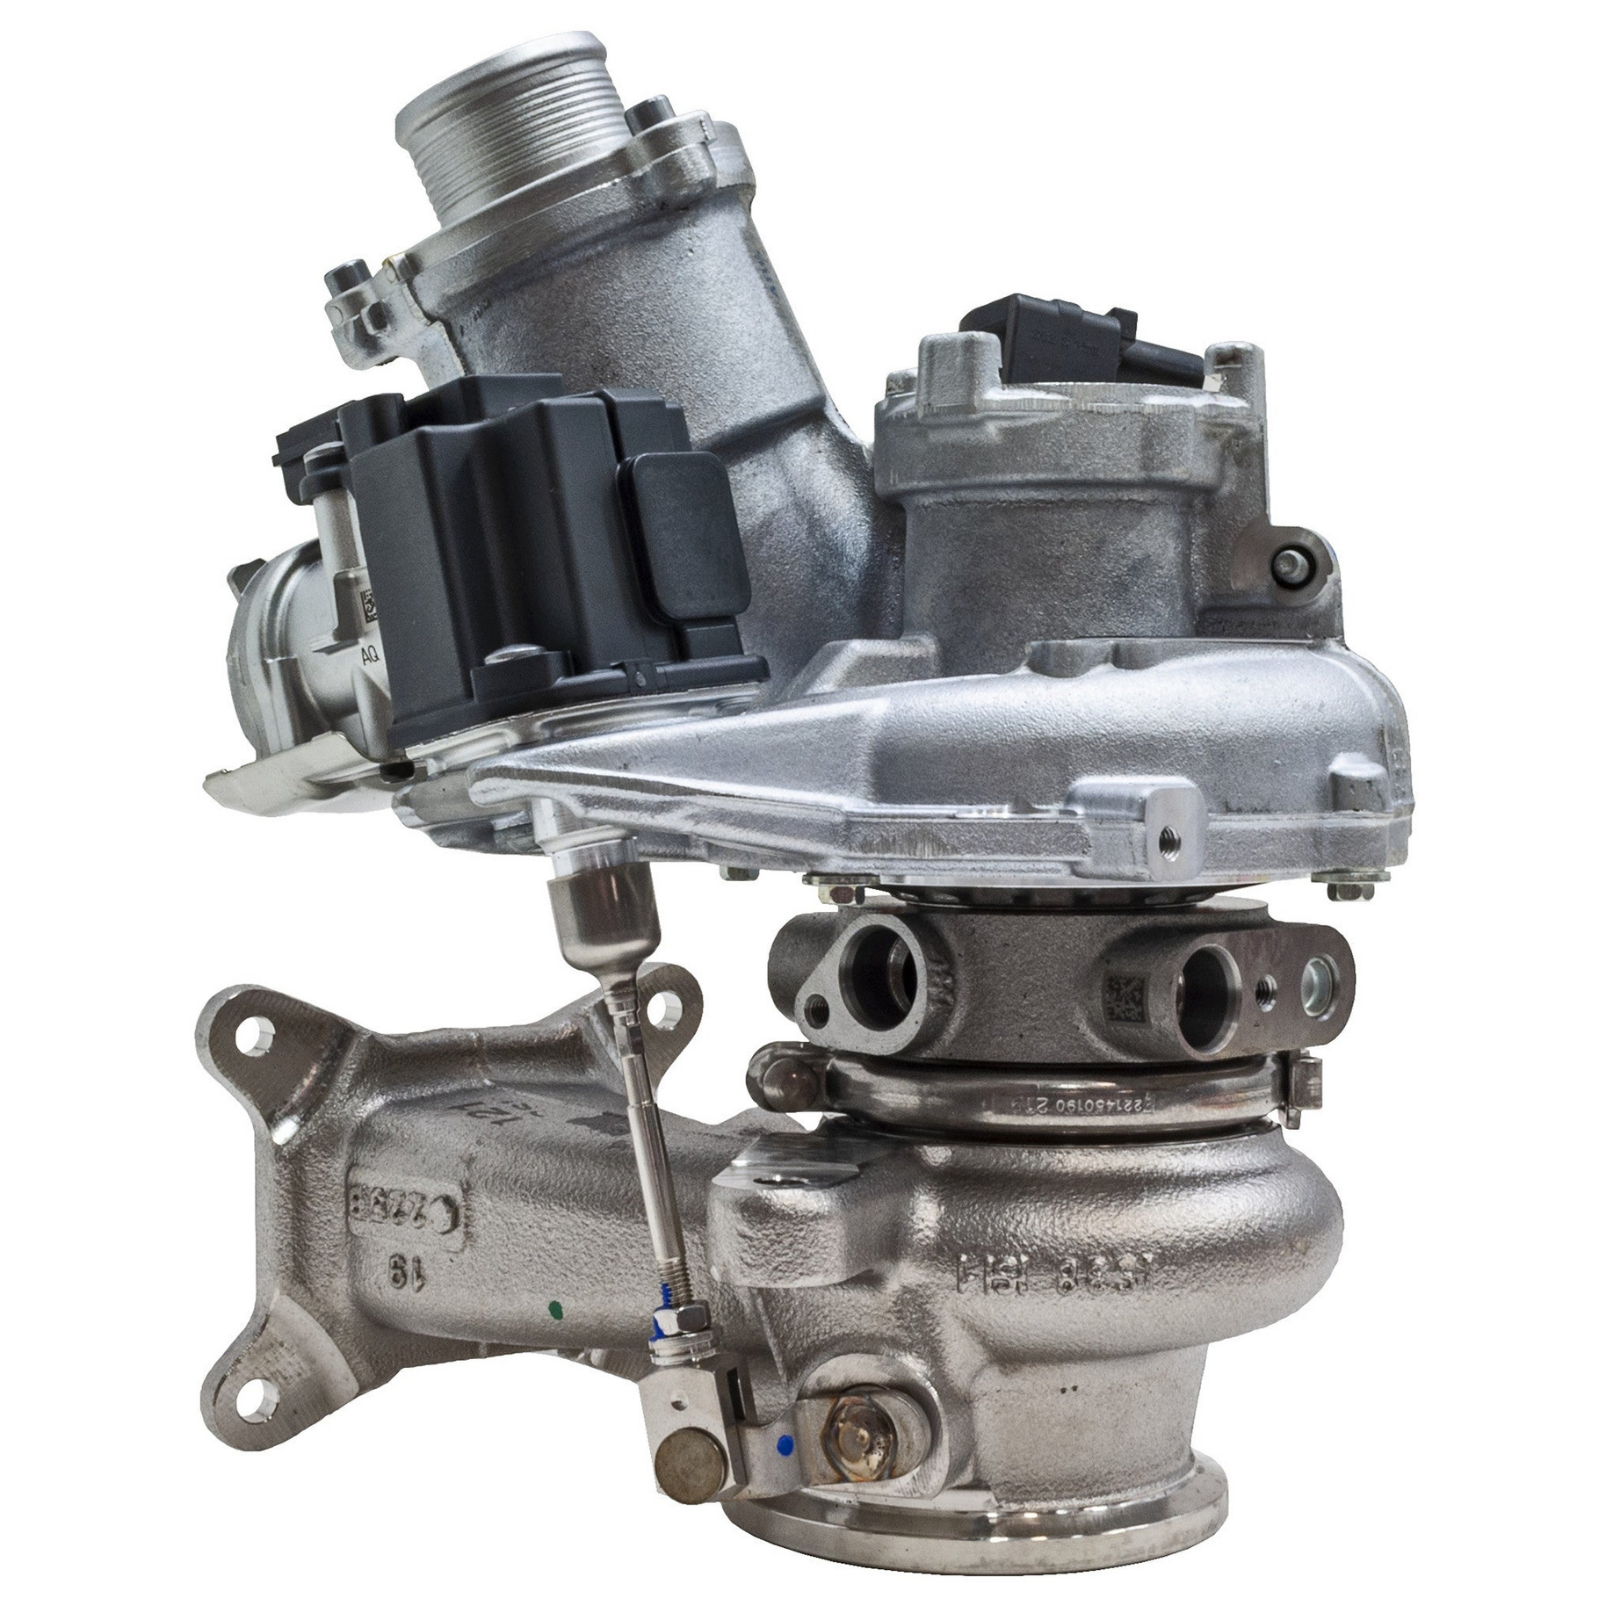 IHI IS38 Turbocharger - VW MK7 & 7.5 GOLF GTI UPGRADE, VW MK7 & 7.5 GOLF R, ED40 & TCR REPLACEMENT